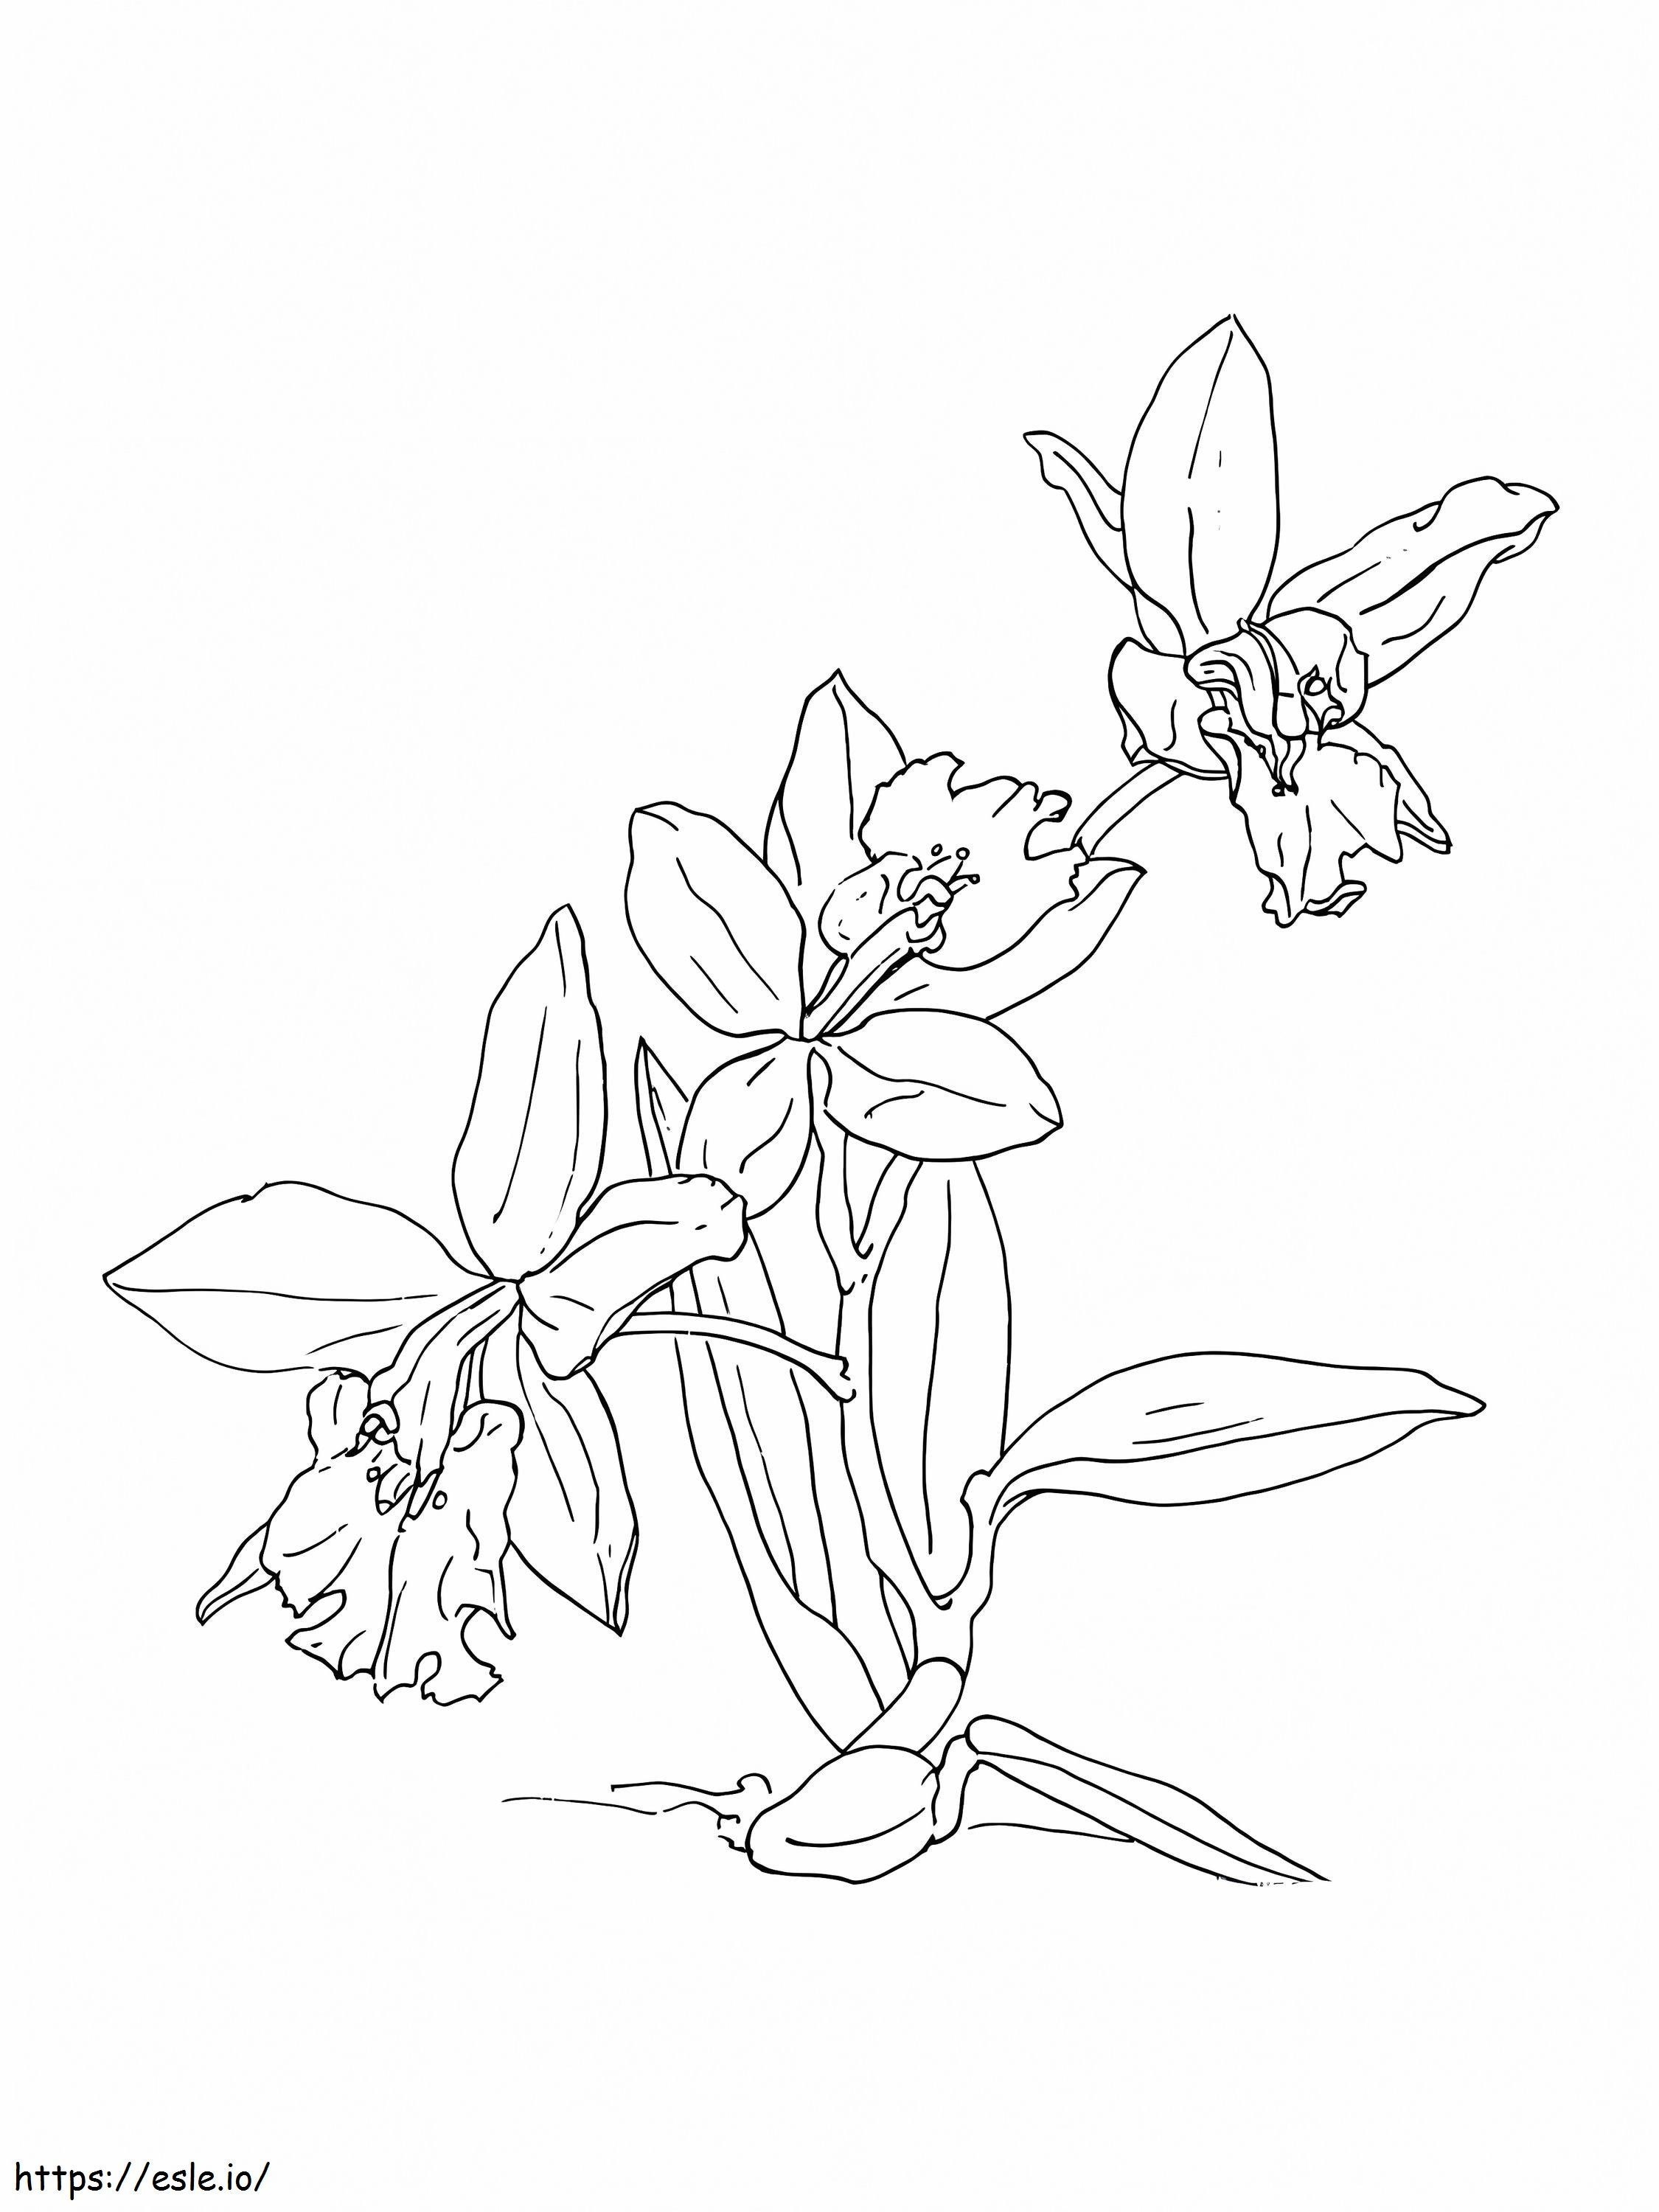 Printable Orchid Flower coloring page